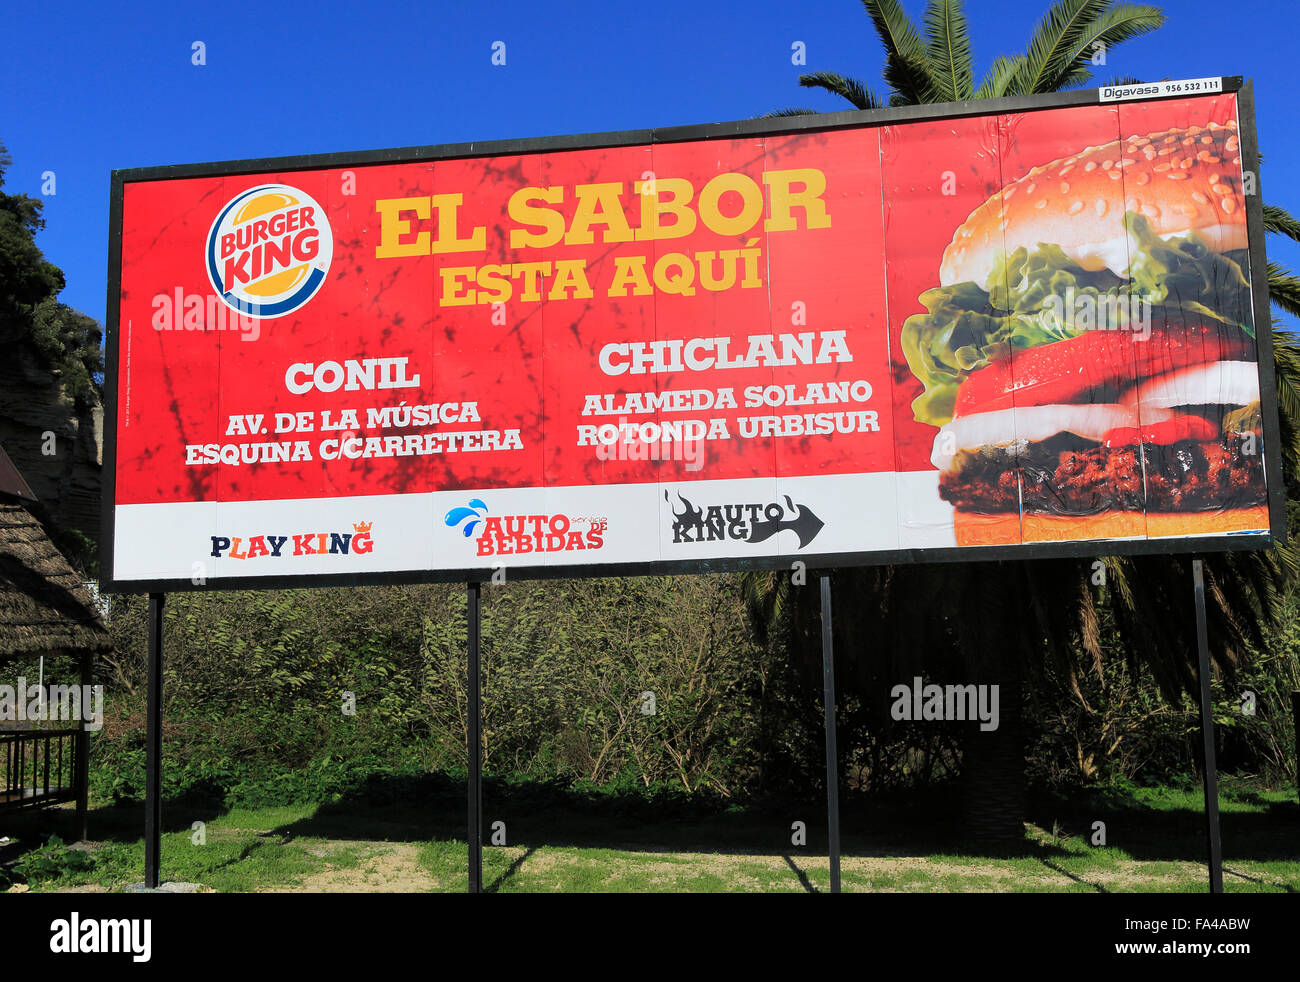 Burger King American fast food restaurant sign near Conil and Chiclana, Cadiz province, Spain Stock Photo